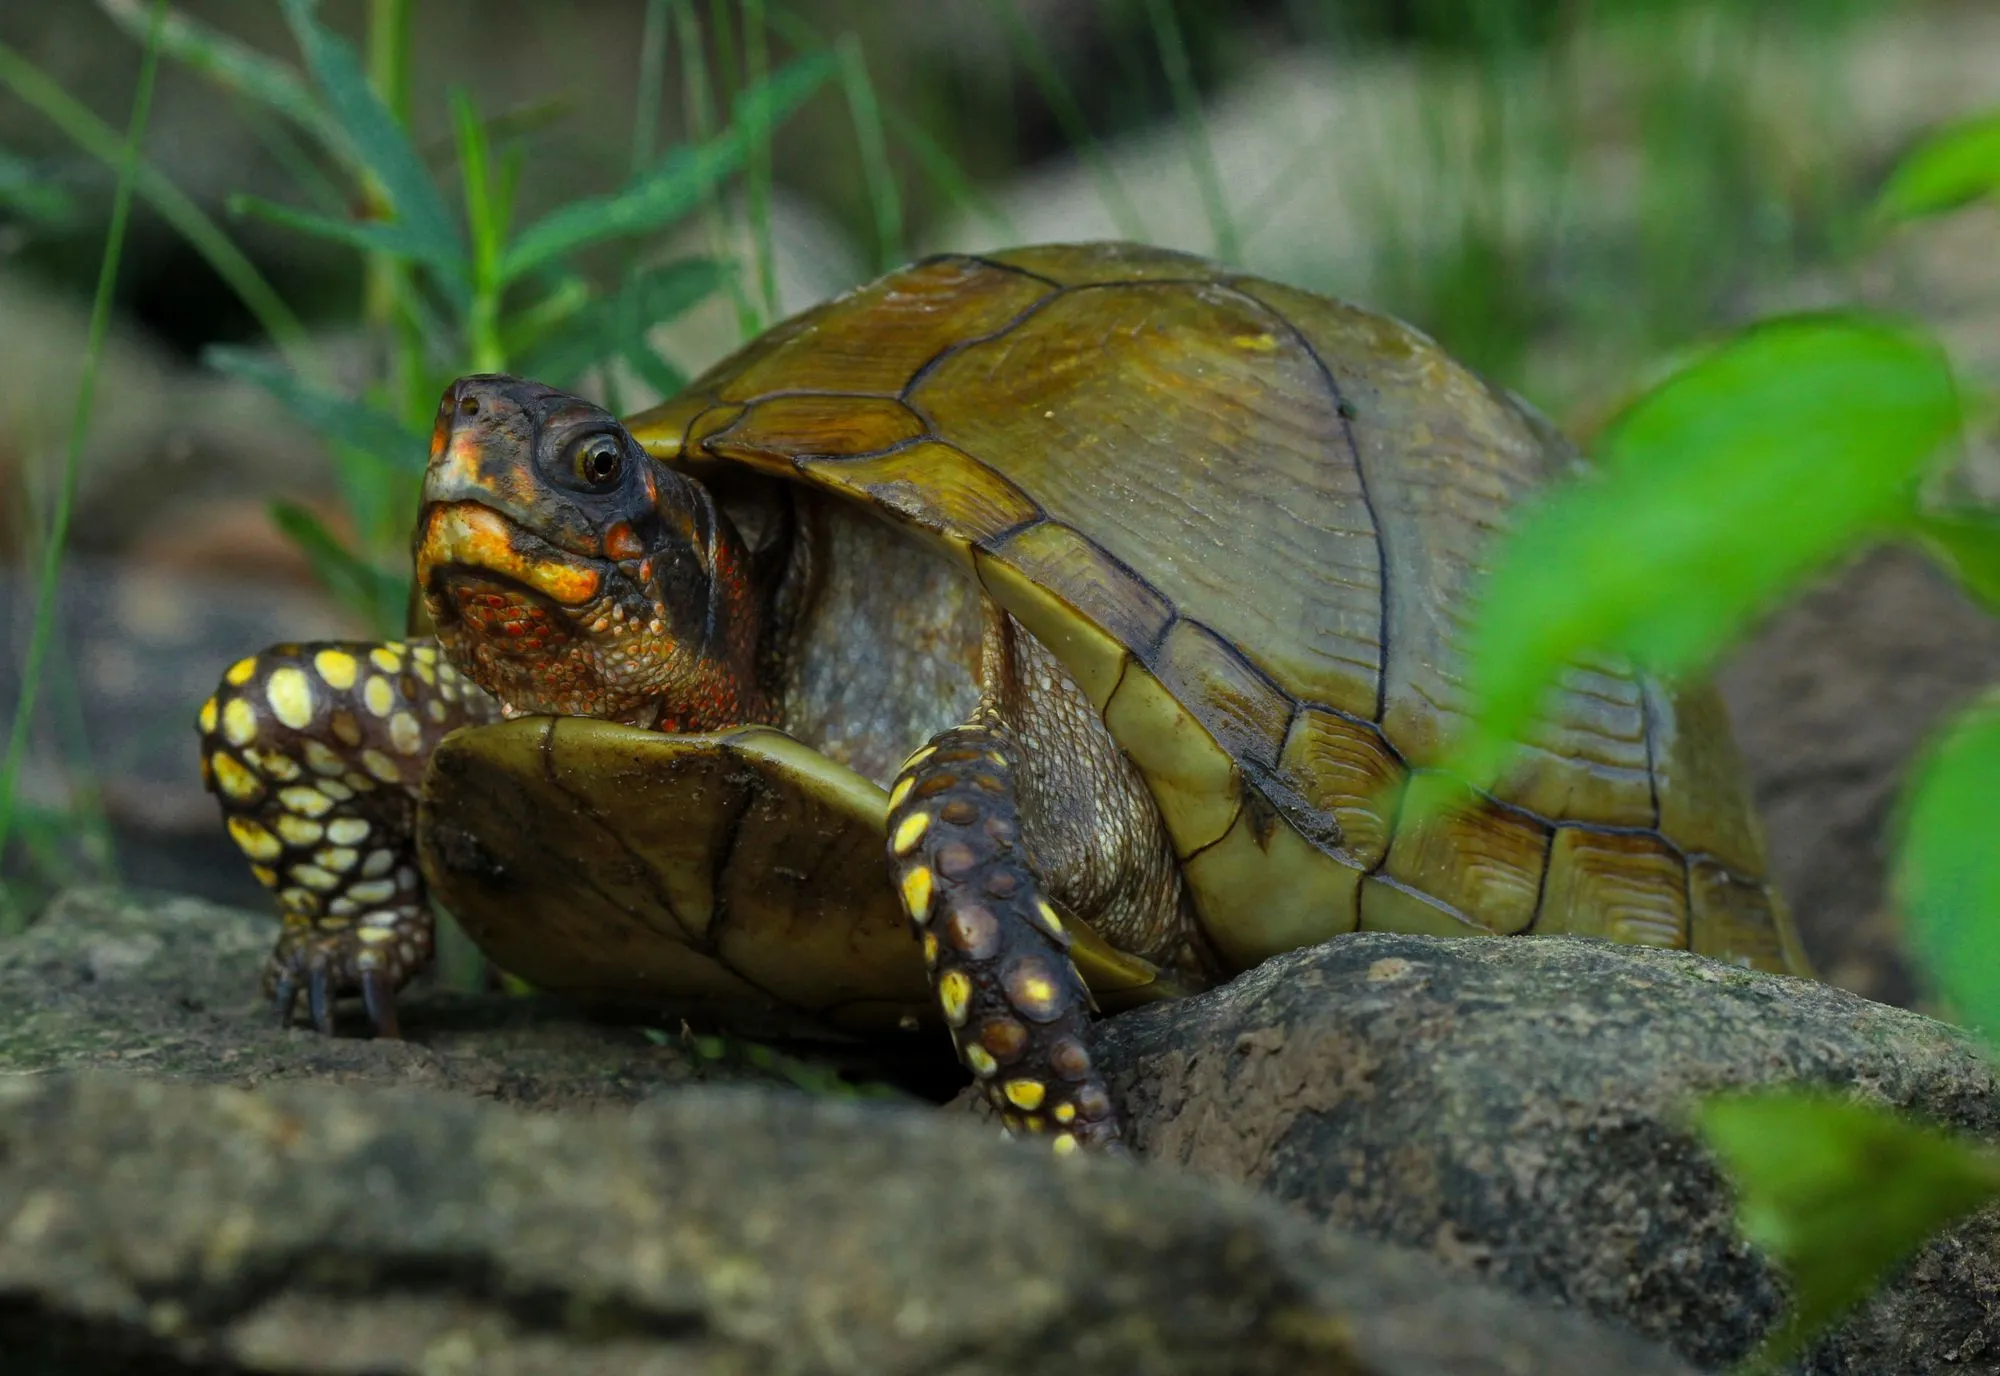 Three-toed box turtle facts are a great read for kids.